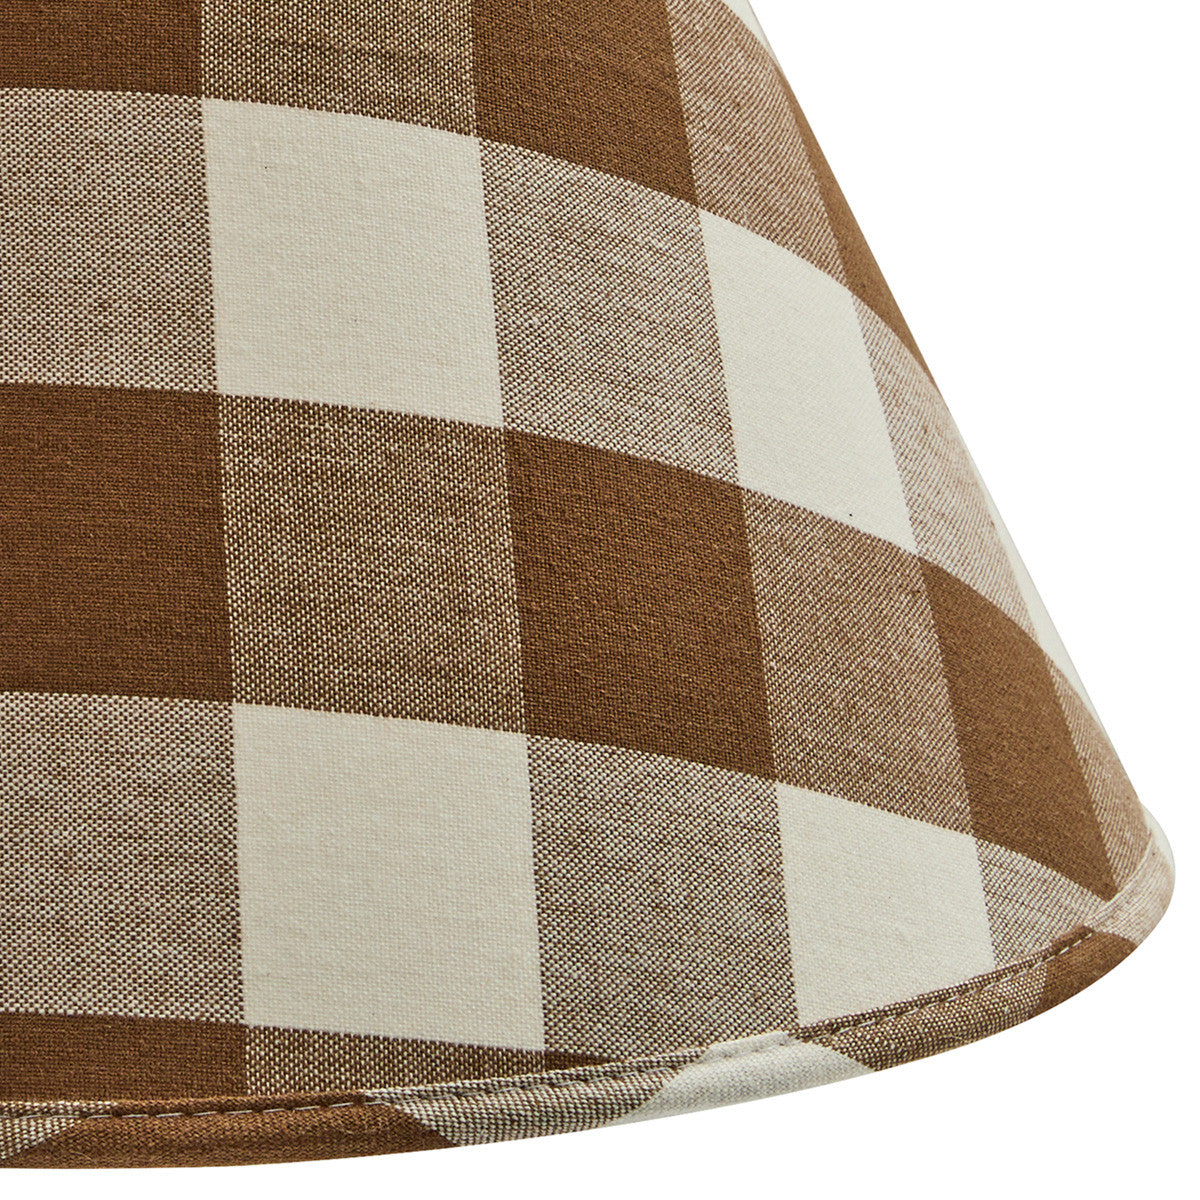 Wicklow Check Brown & Cream Lamp Shade - 12" Set of 2 Park Designs